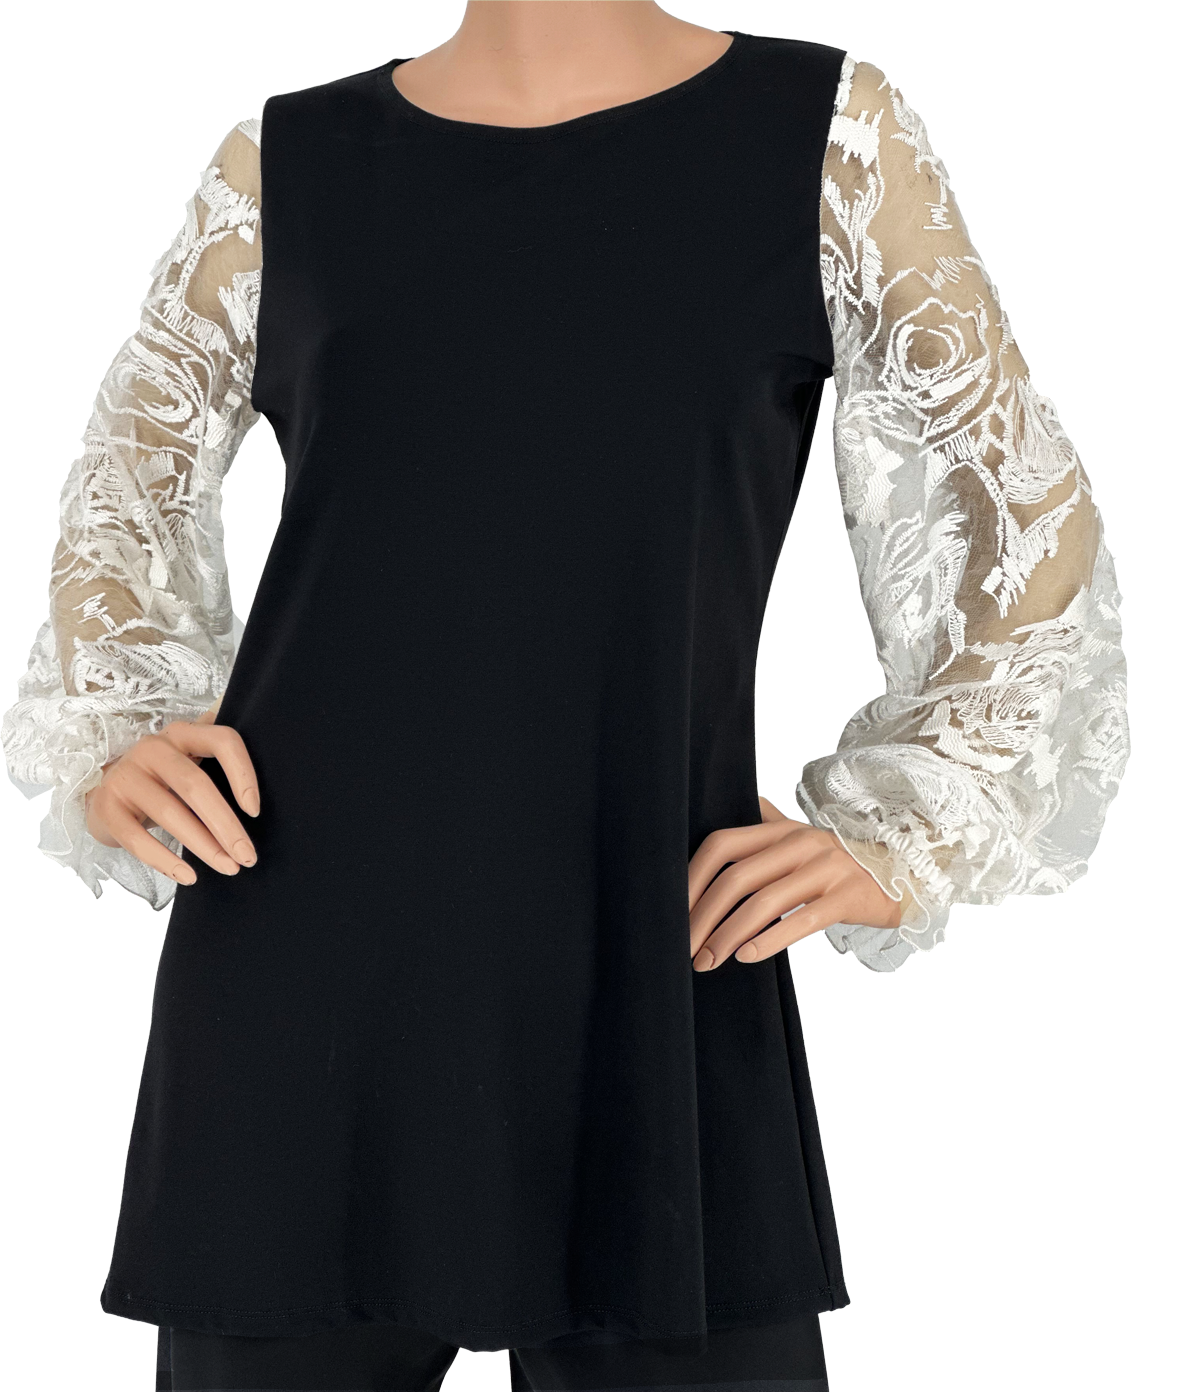 B865 Black Top with lace detailed sleeves